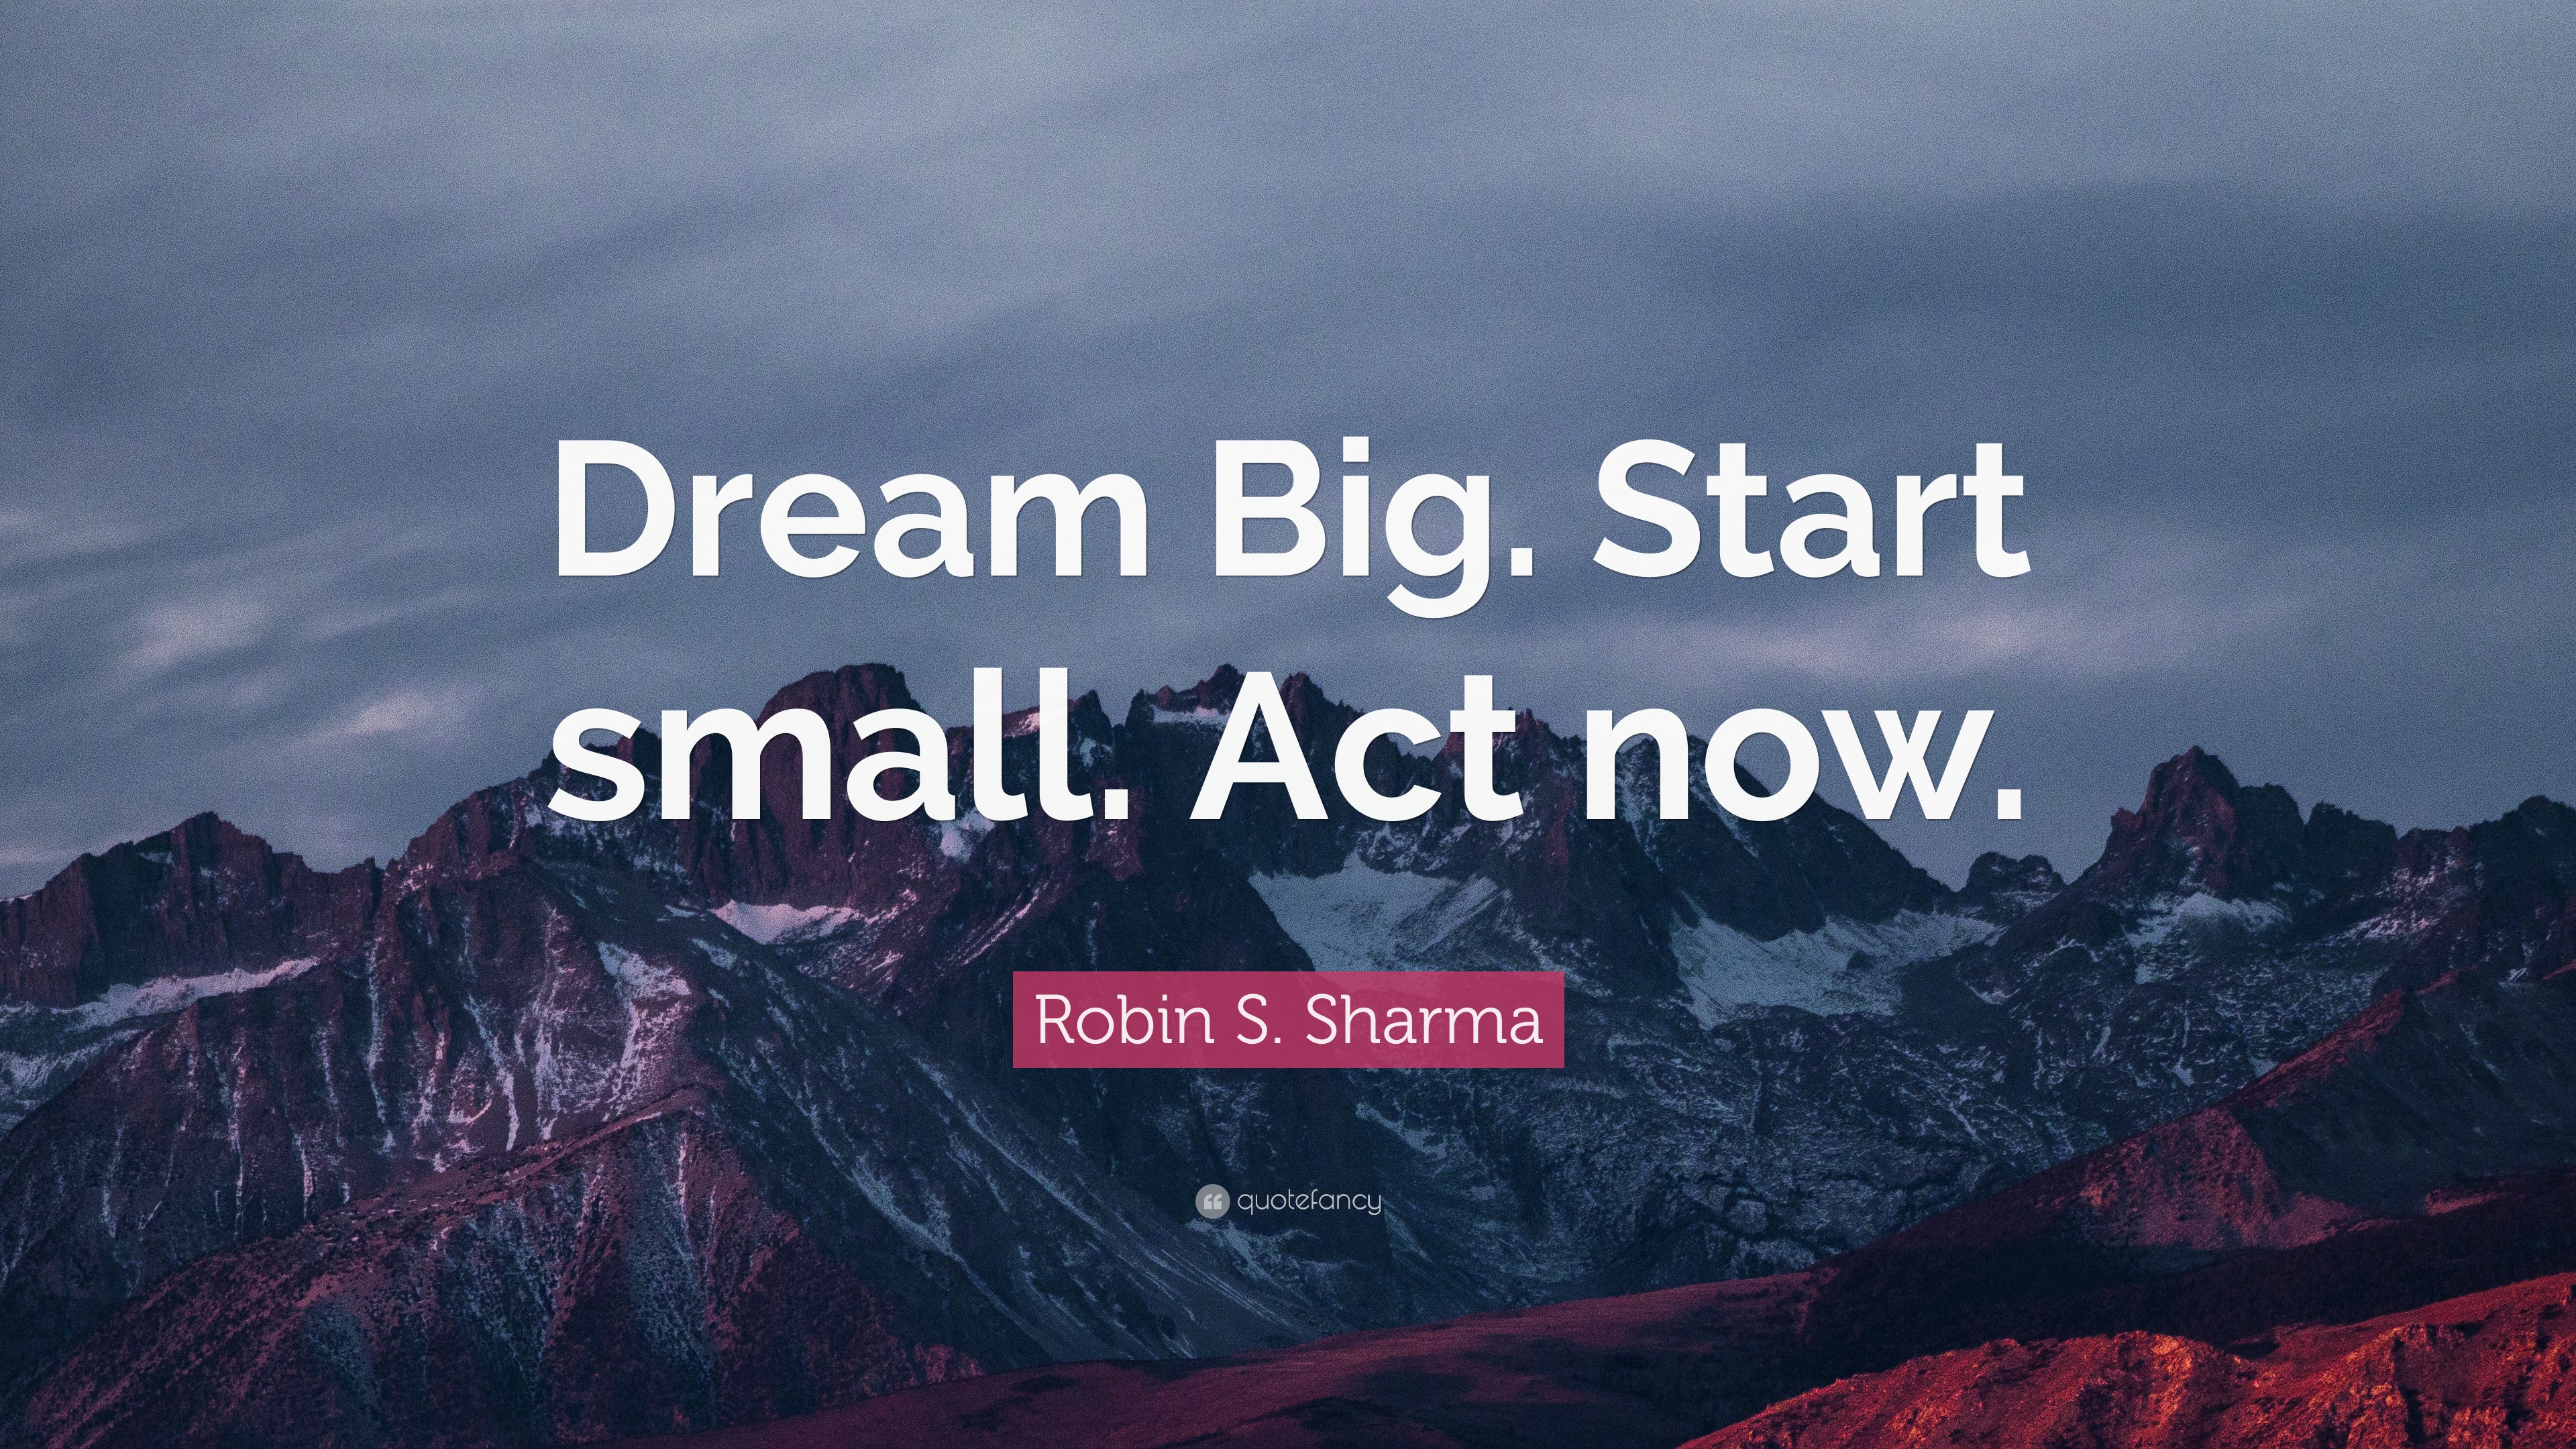 Robin S. Sharma Quote: “Dream Big. Start Small. Act Now.”